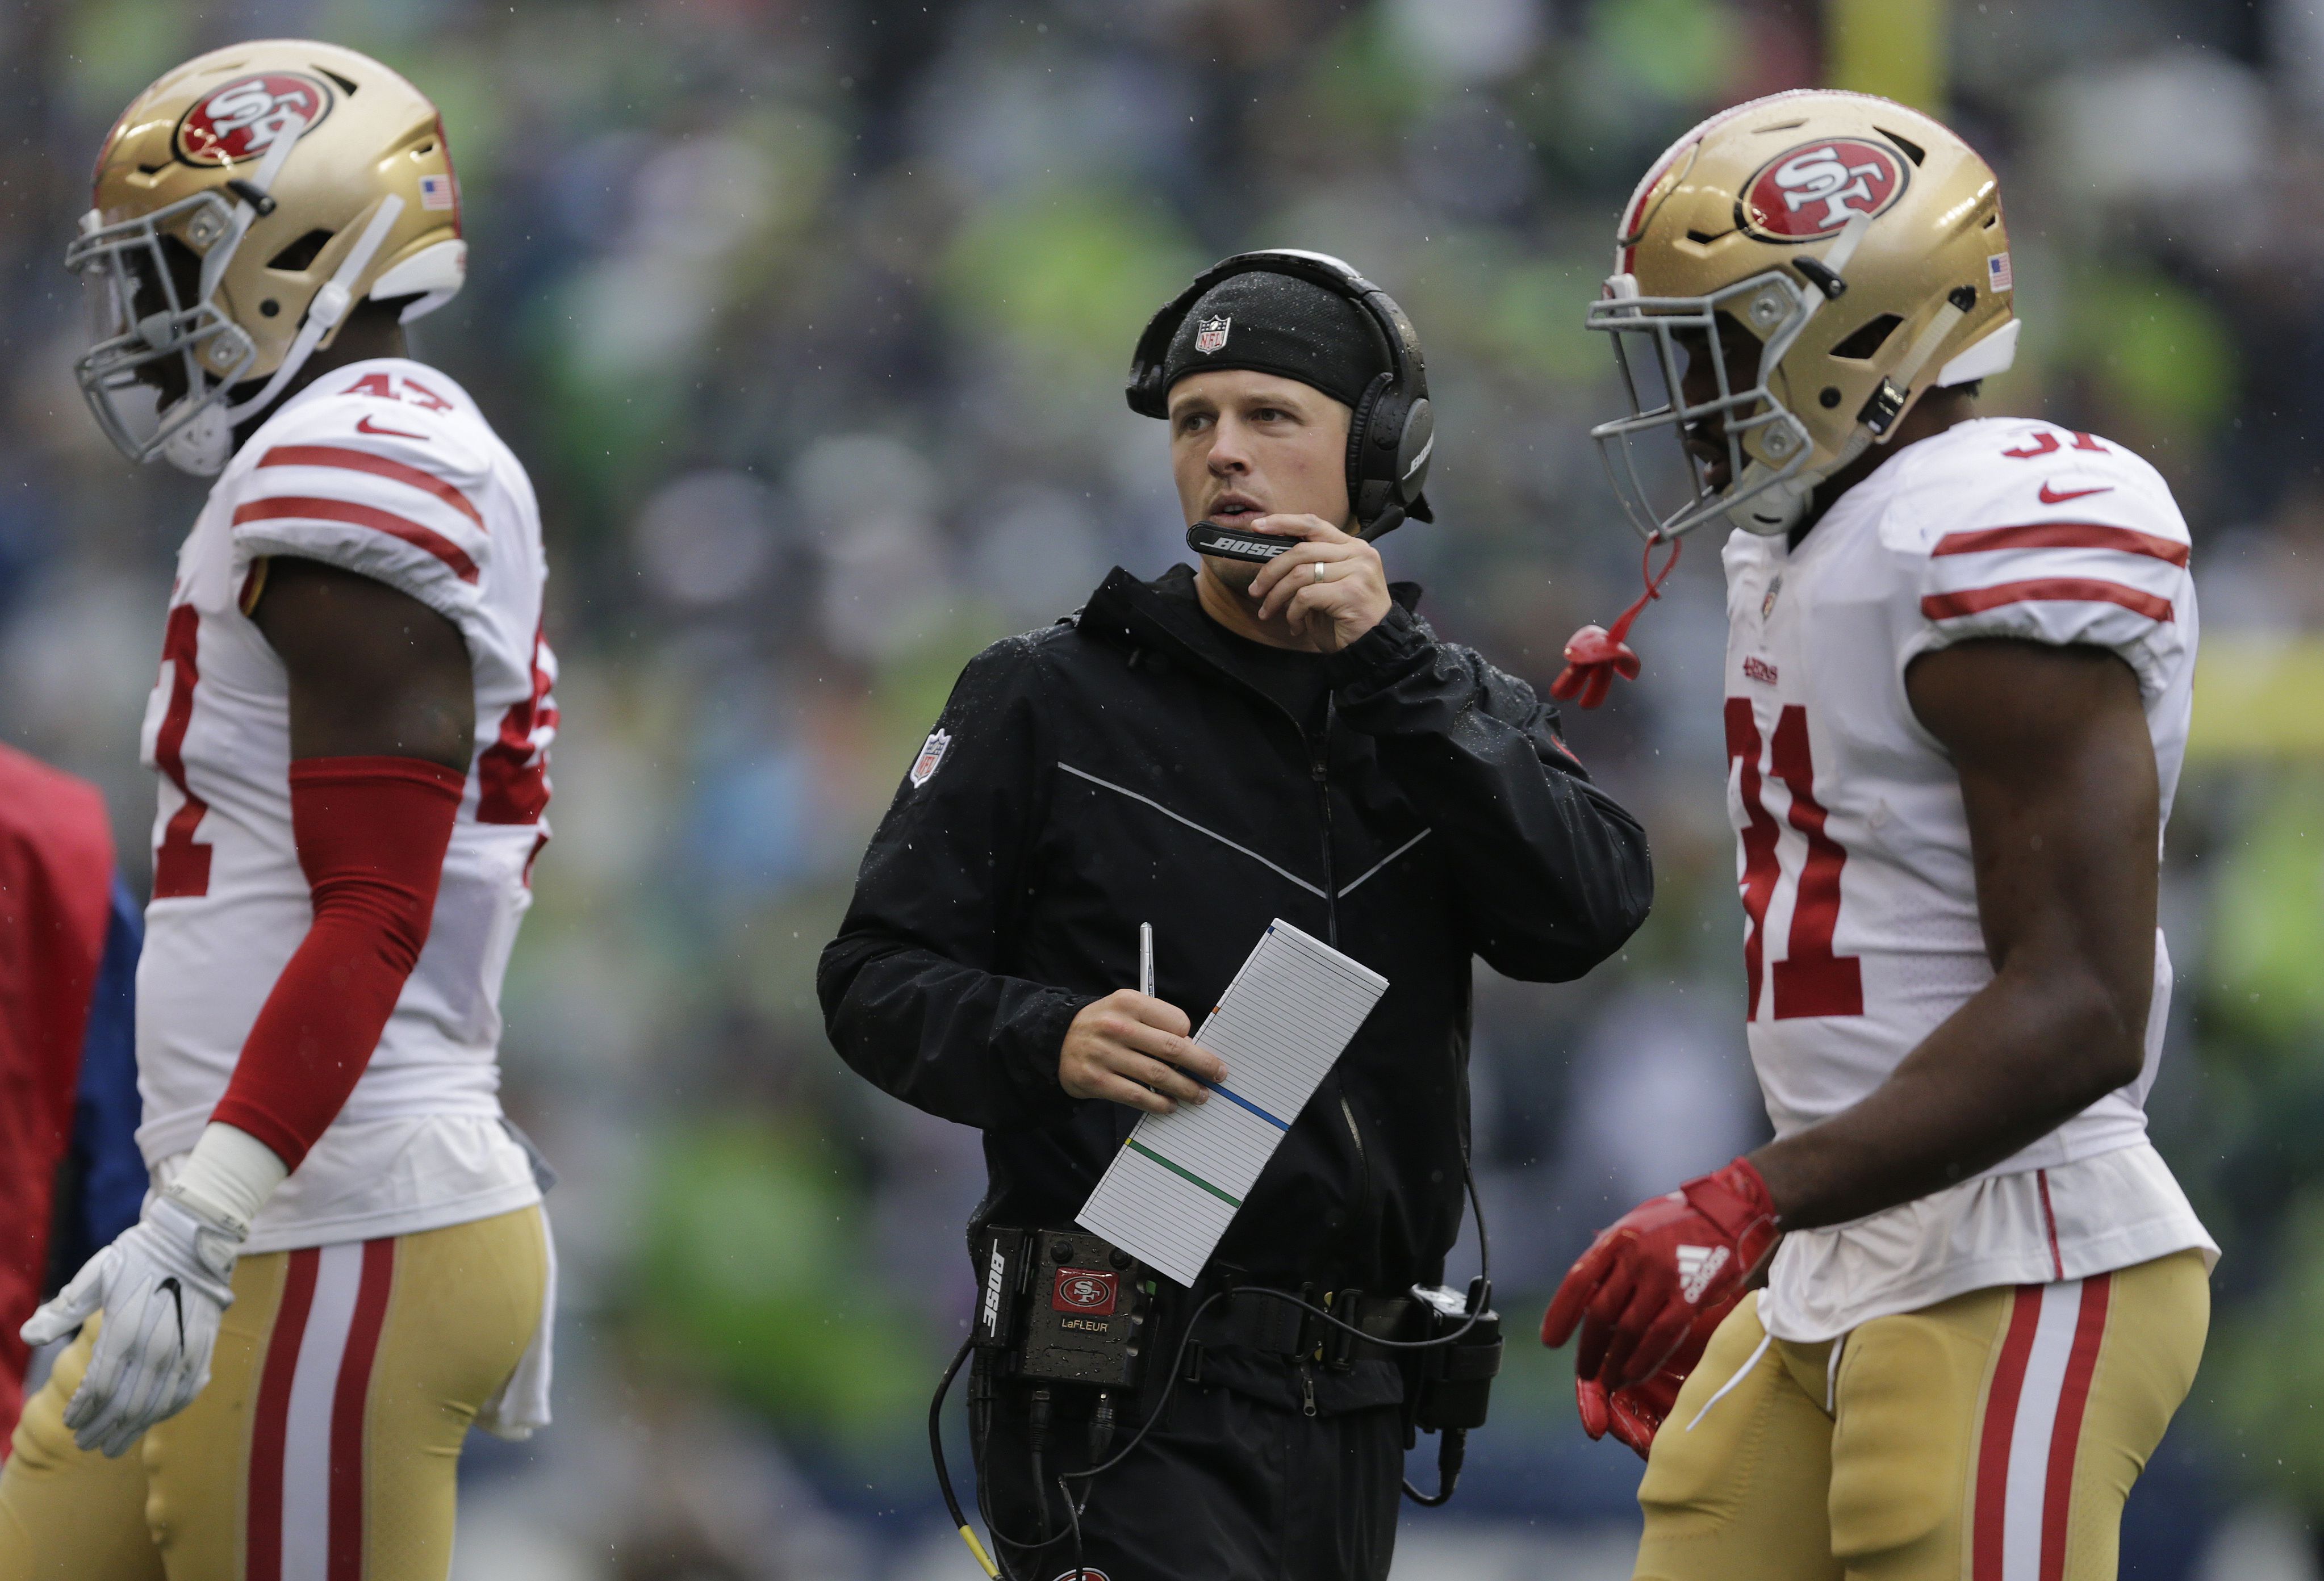 Kyle Shanahan and Mike McDaniel are changing the NFL as we know it